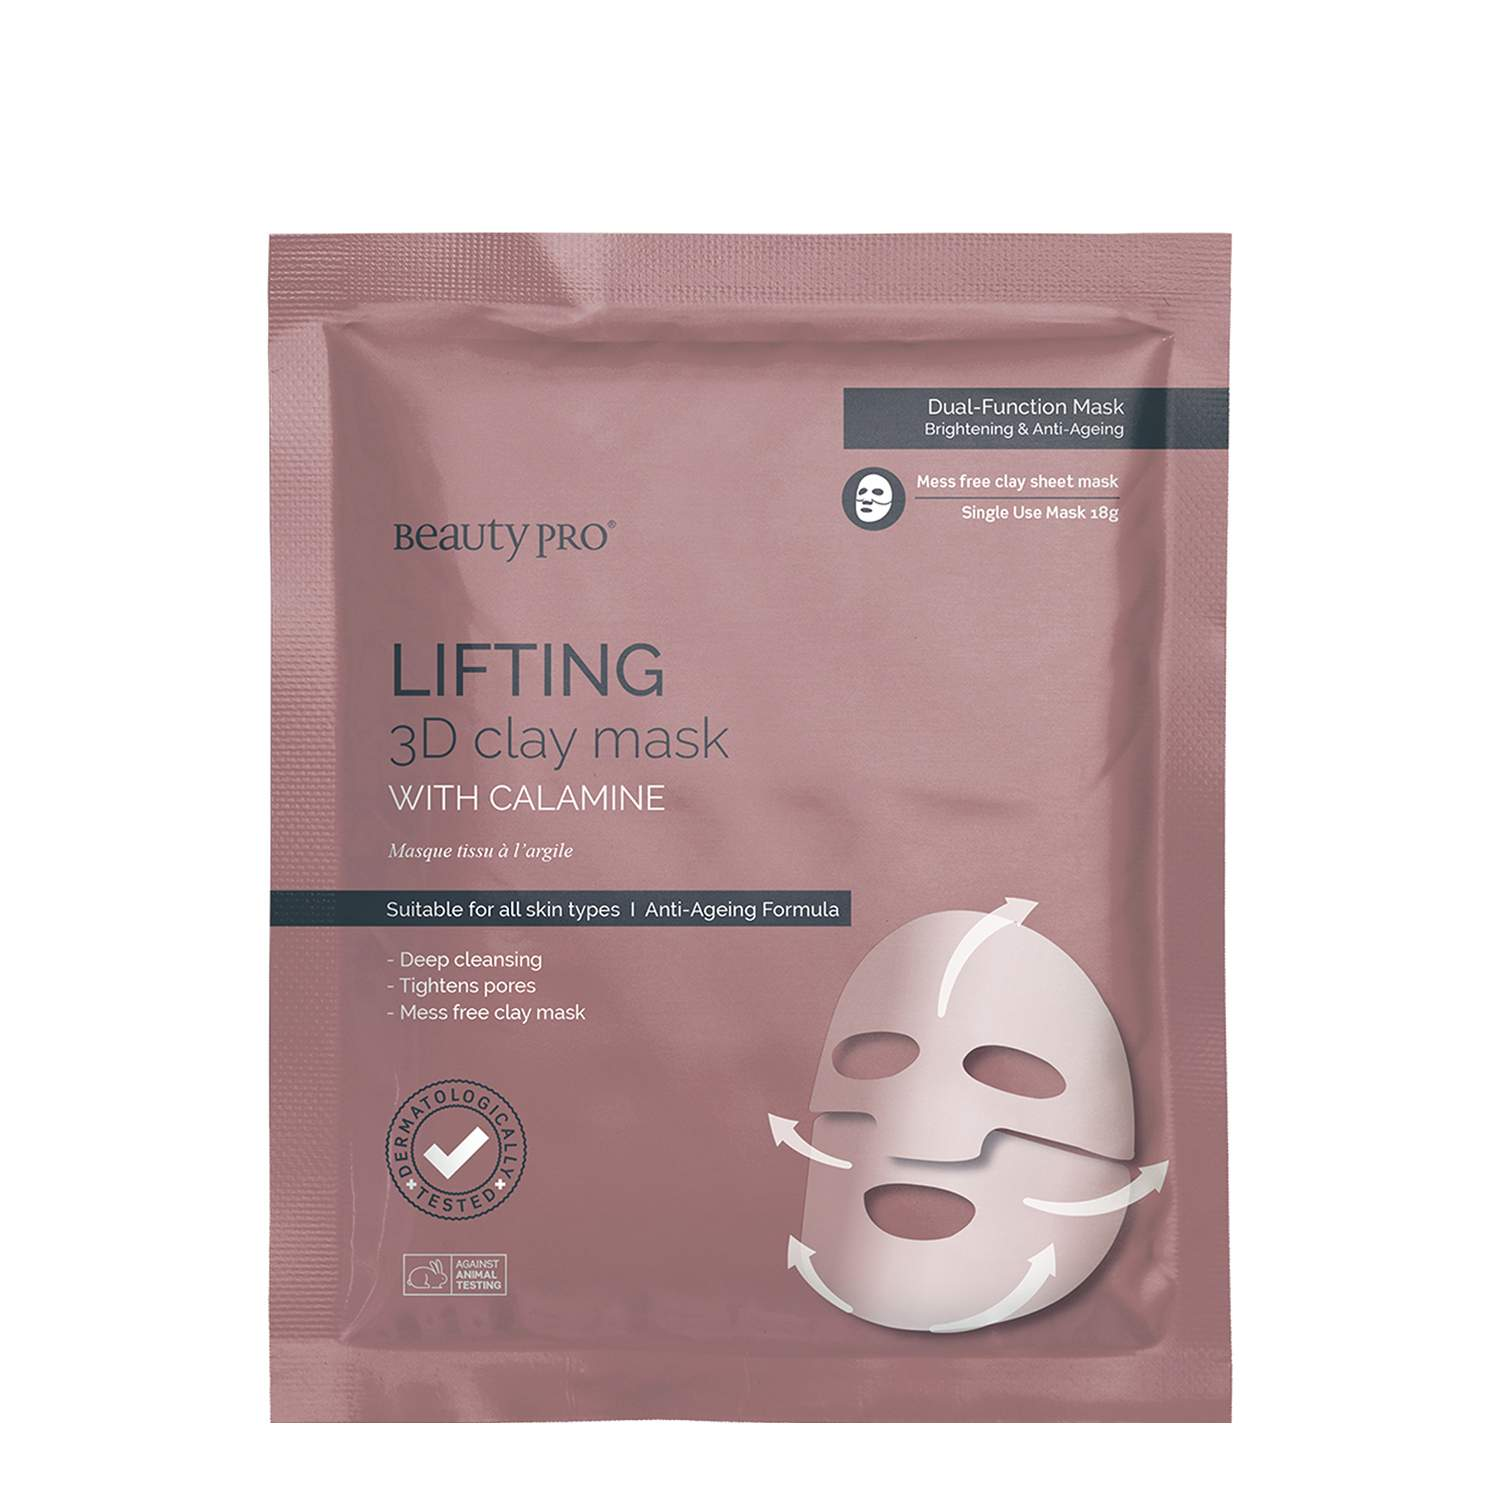 BeautyPro LIFTING 3D Clay Mask with Calamine BeautyPro LIFTING 3D Clay Mask with Calamine 1